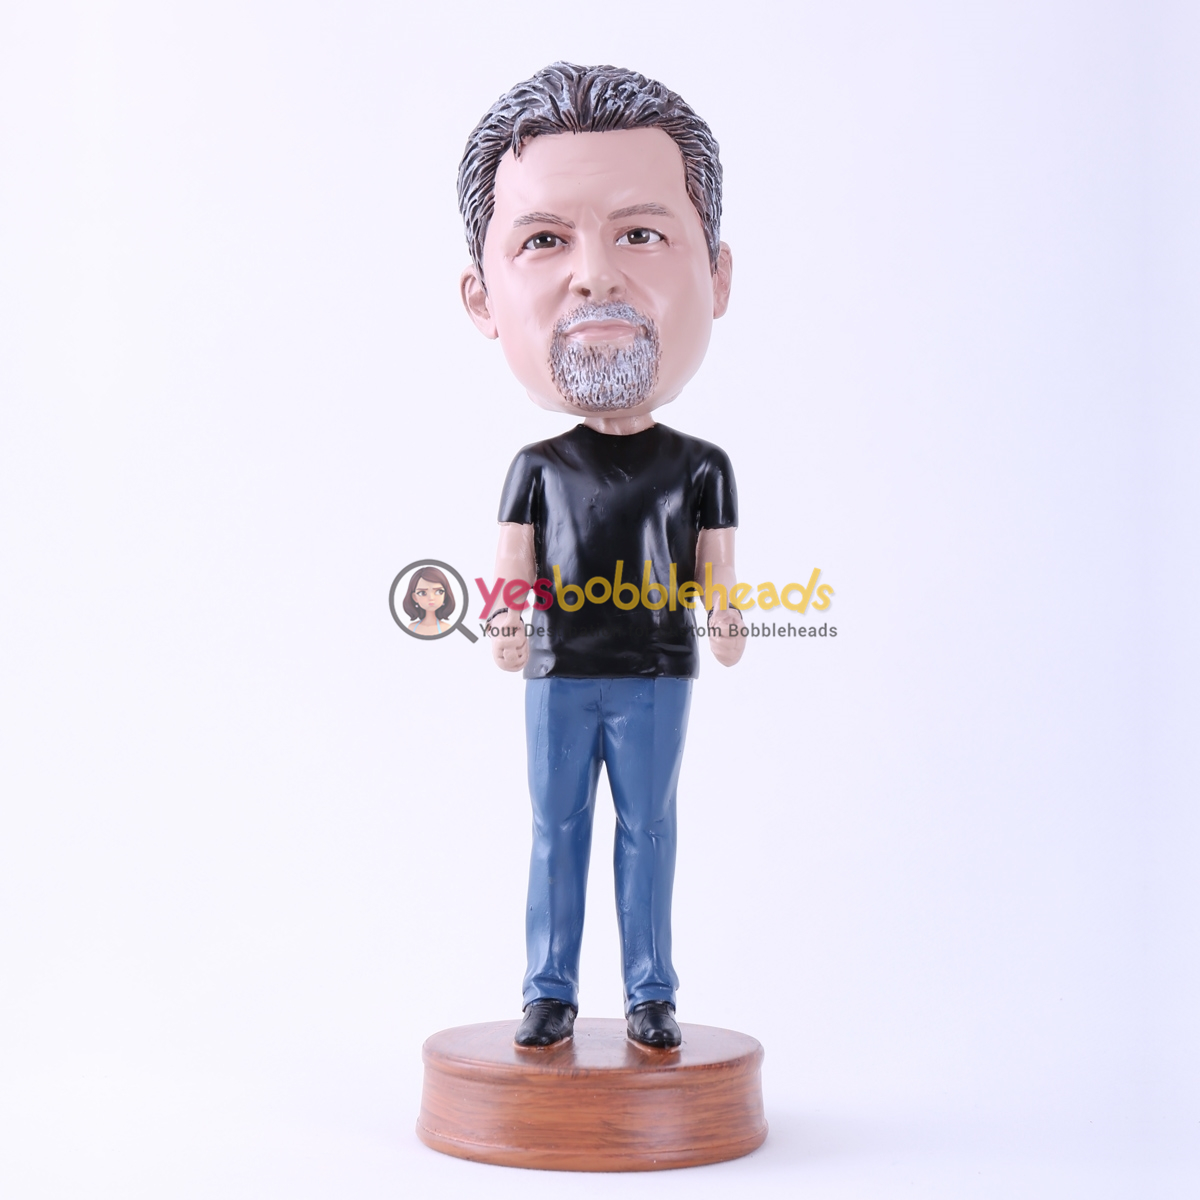 Picture of Custom Bobblehead Doll: Man Both Thumbs Up